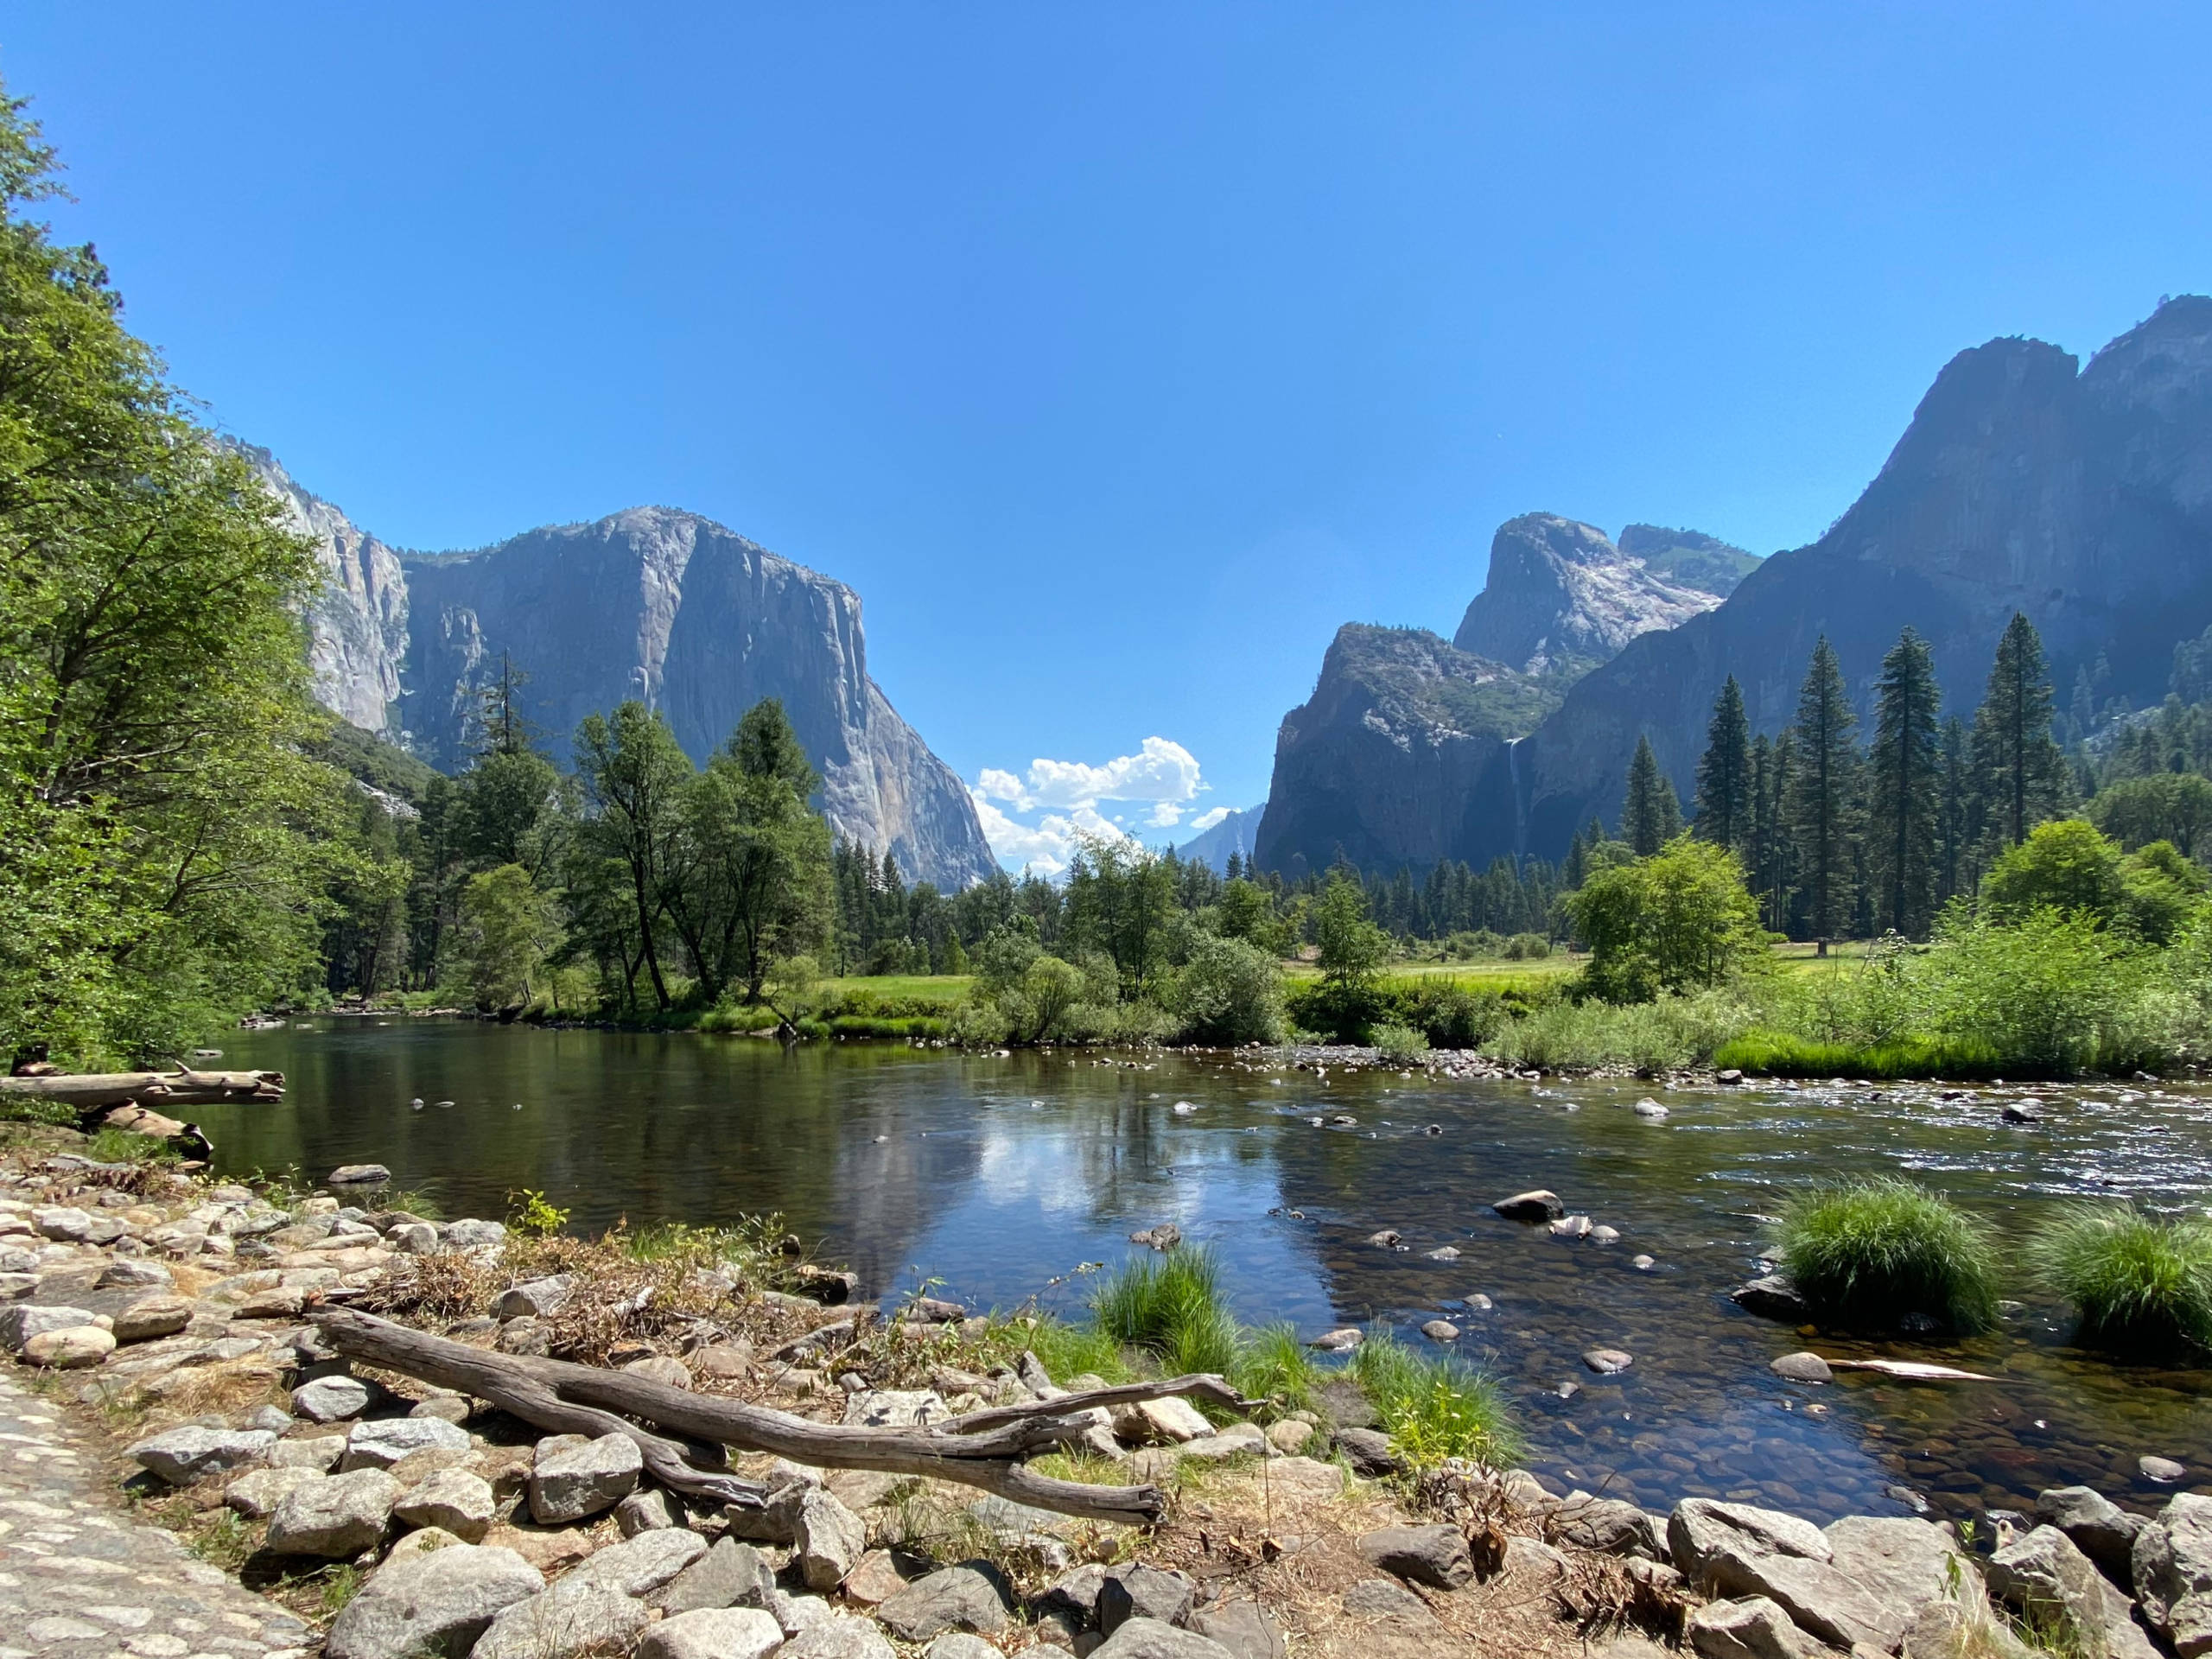 Everything you need to know about visiting Yosemite National Park